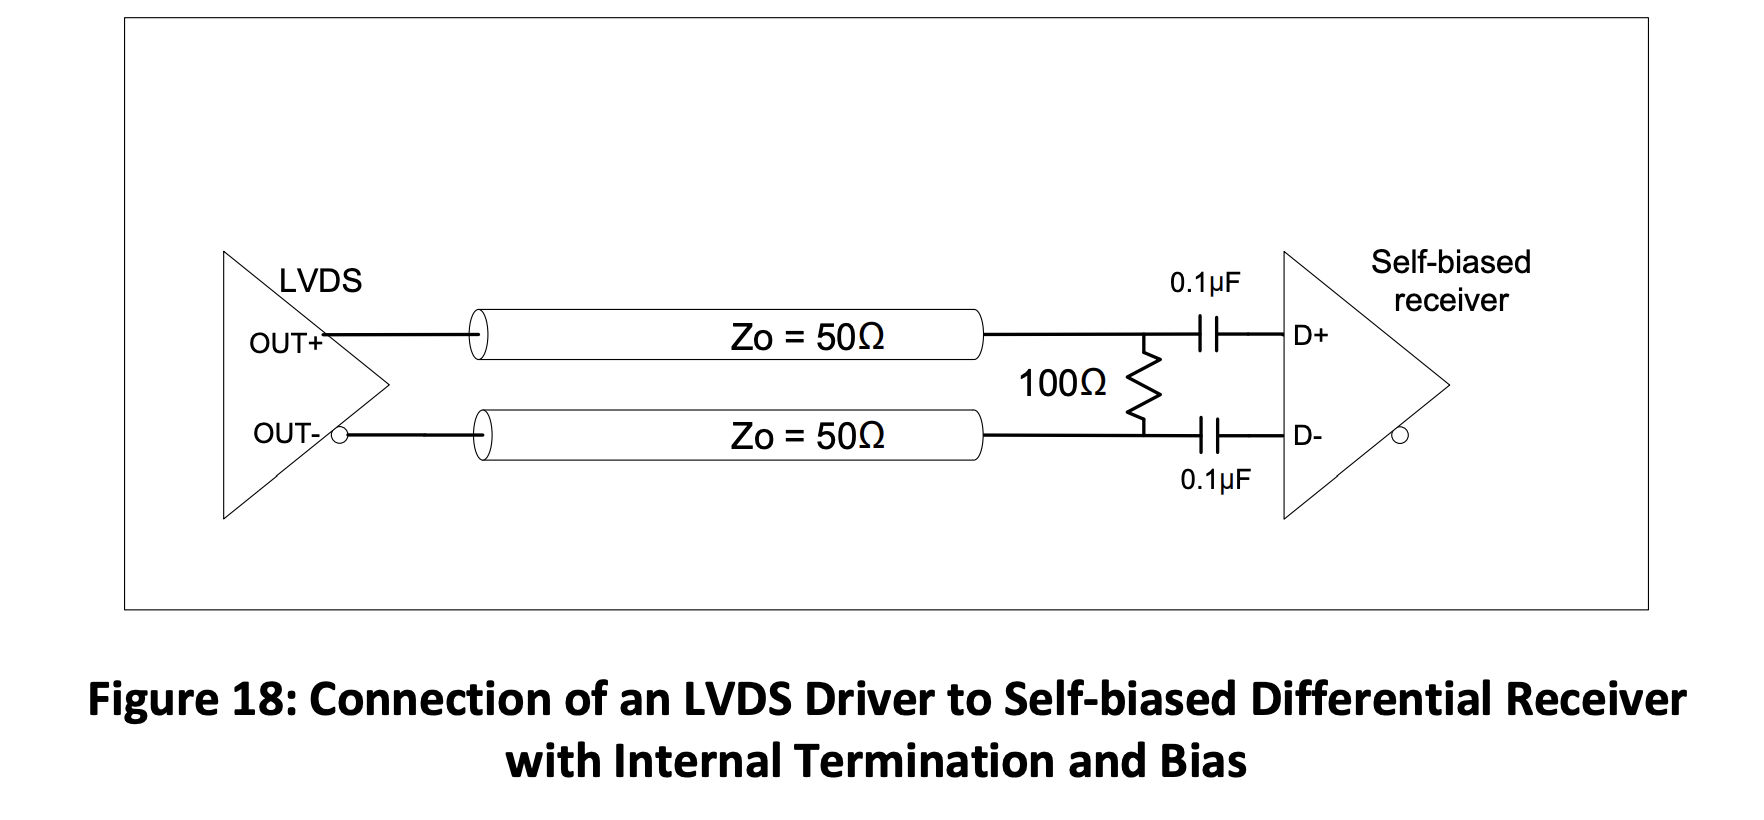 Figure 18 Connection of an LVDS Driver to Self-biased Differntial Receiver with Internal Termination and Bias